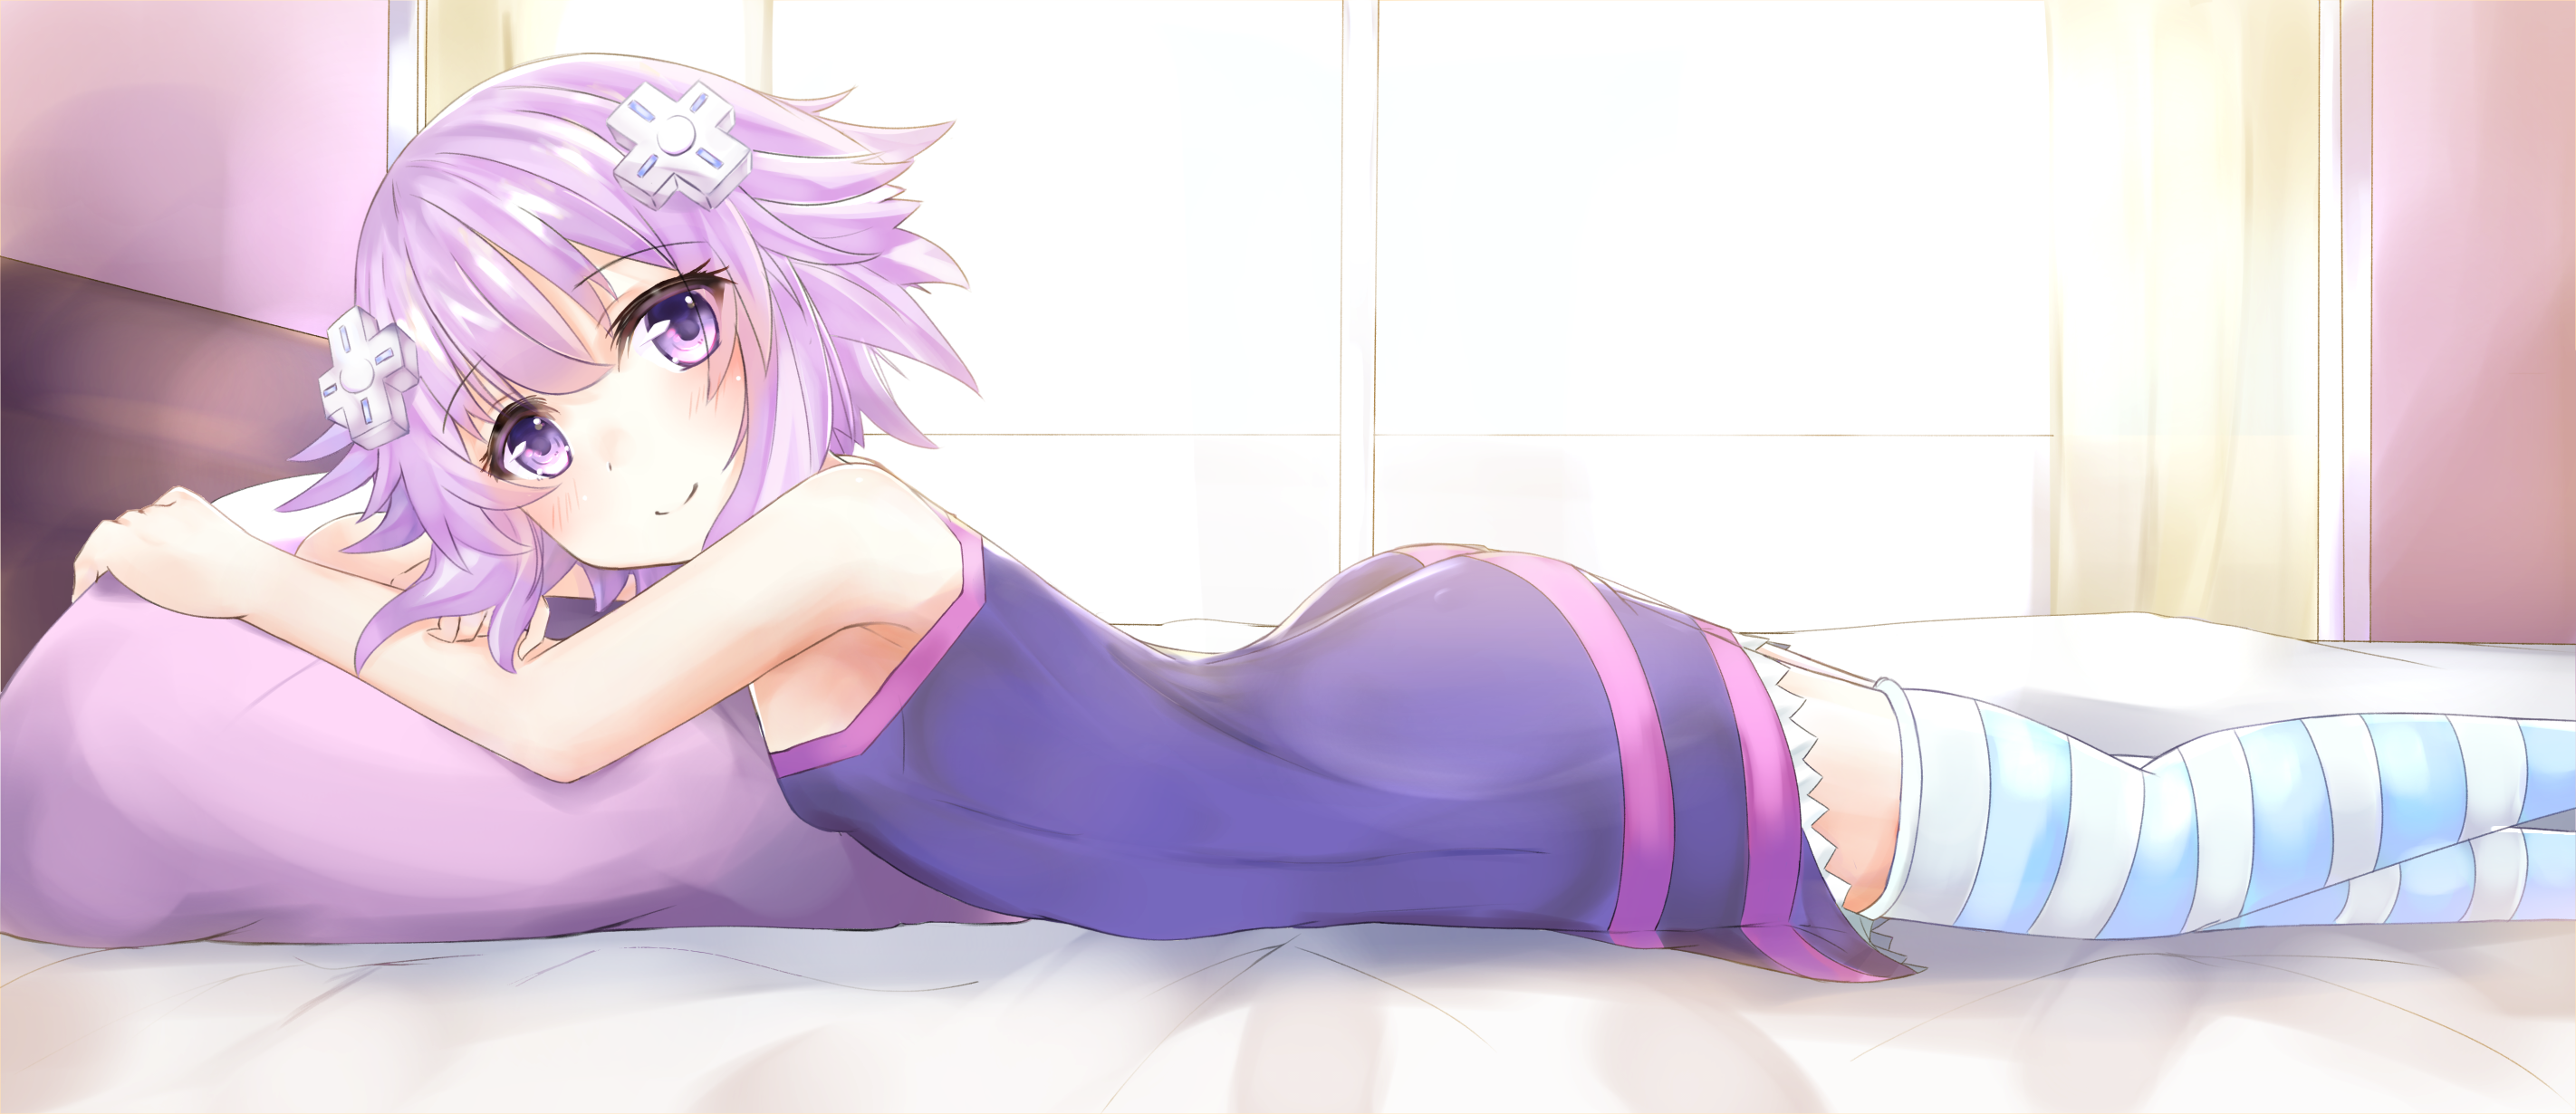 Nep laying with you